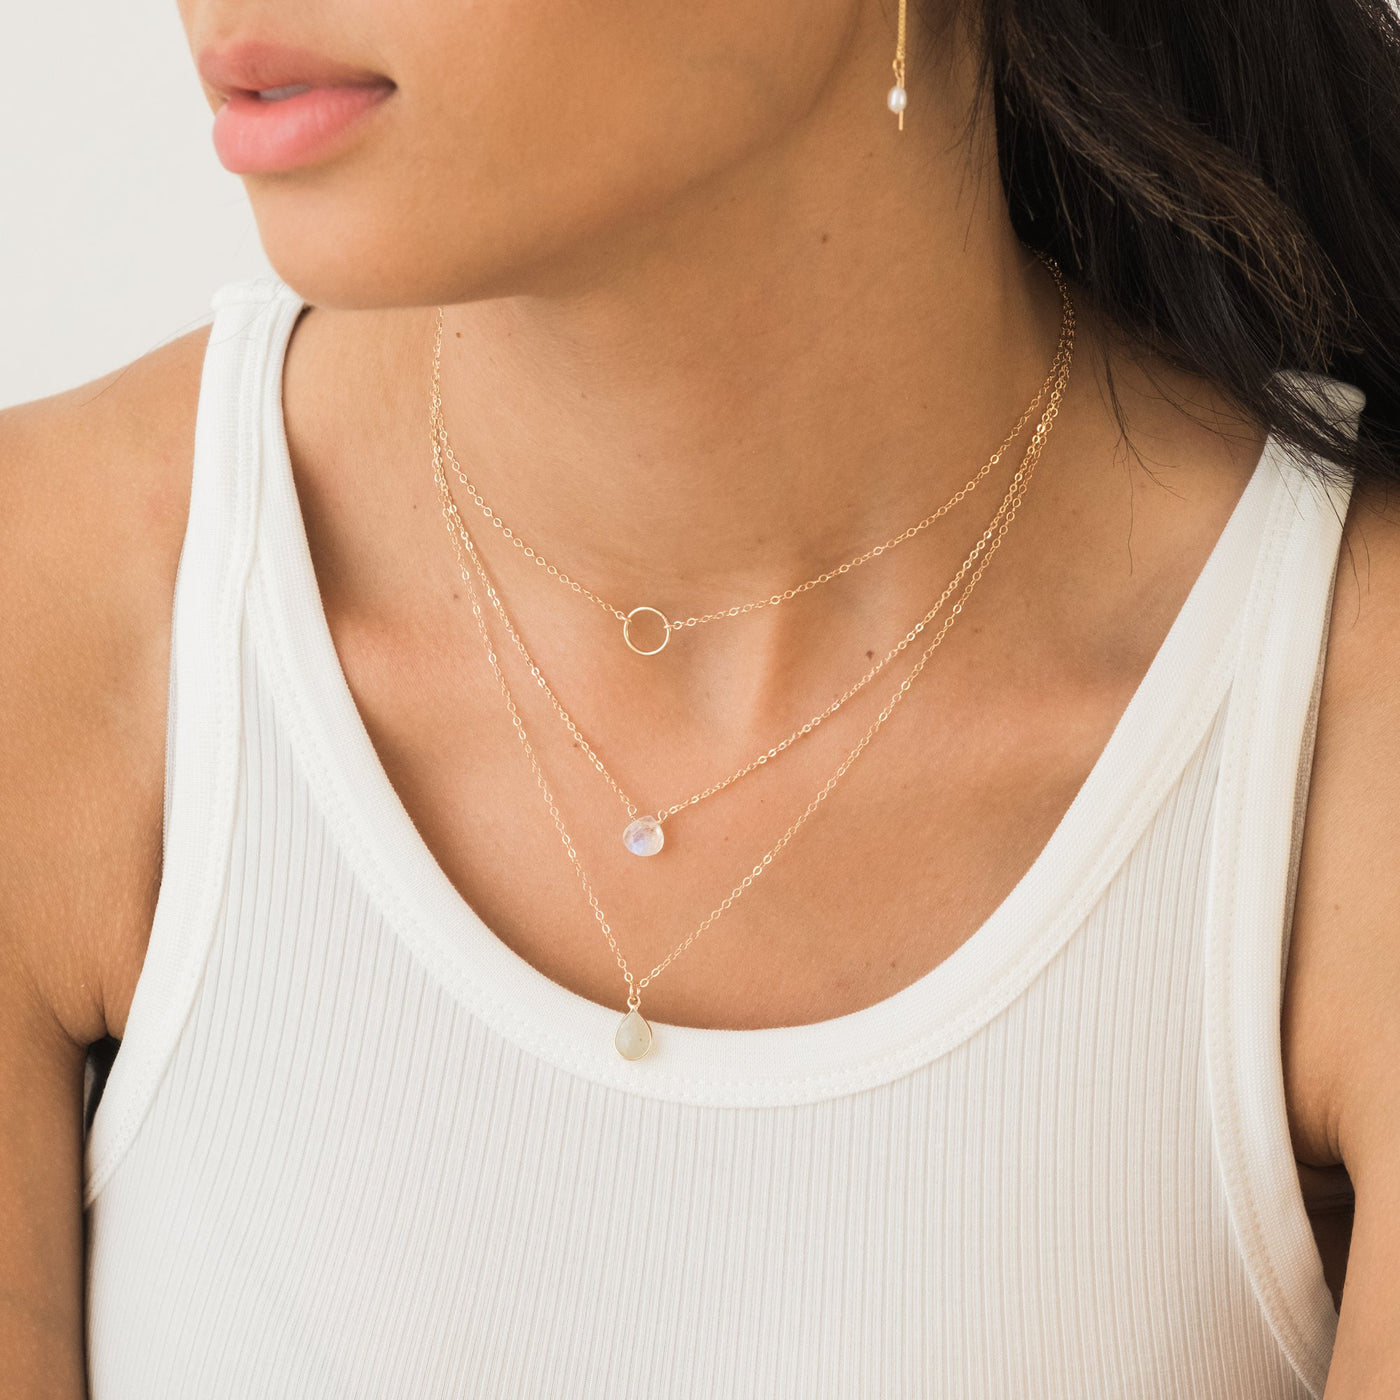 Rainbow Moonstone Necklace, Dainty Moonstone Pendant, Gold Moonstone  Jewelry, Gold Bar Chain, Simple Moonstone Gift for Women